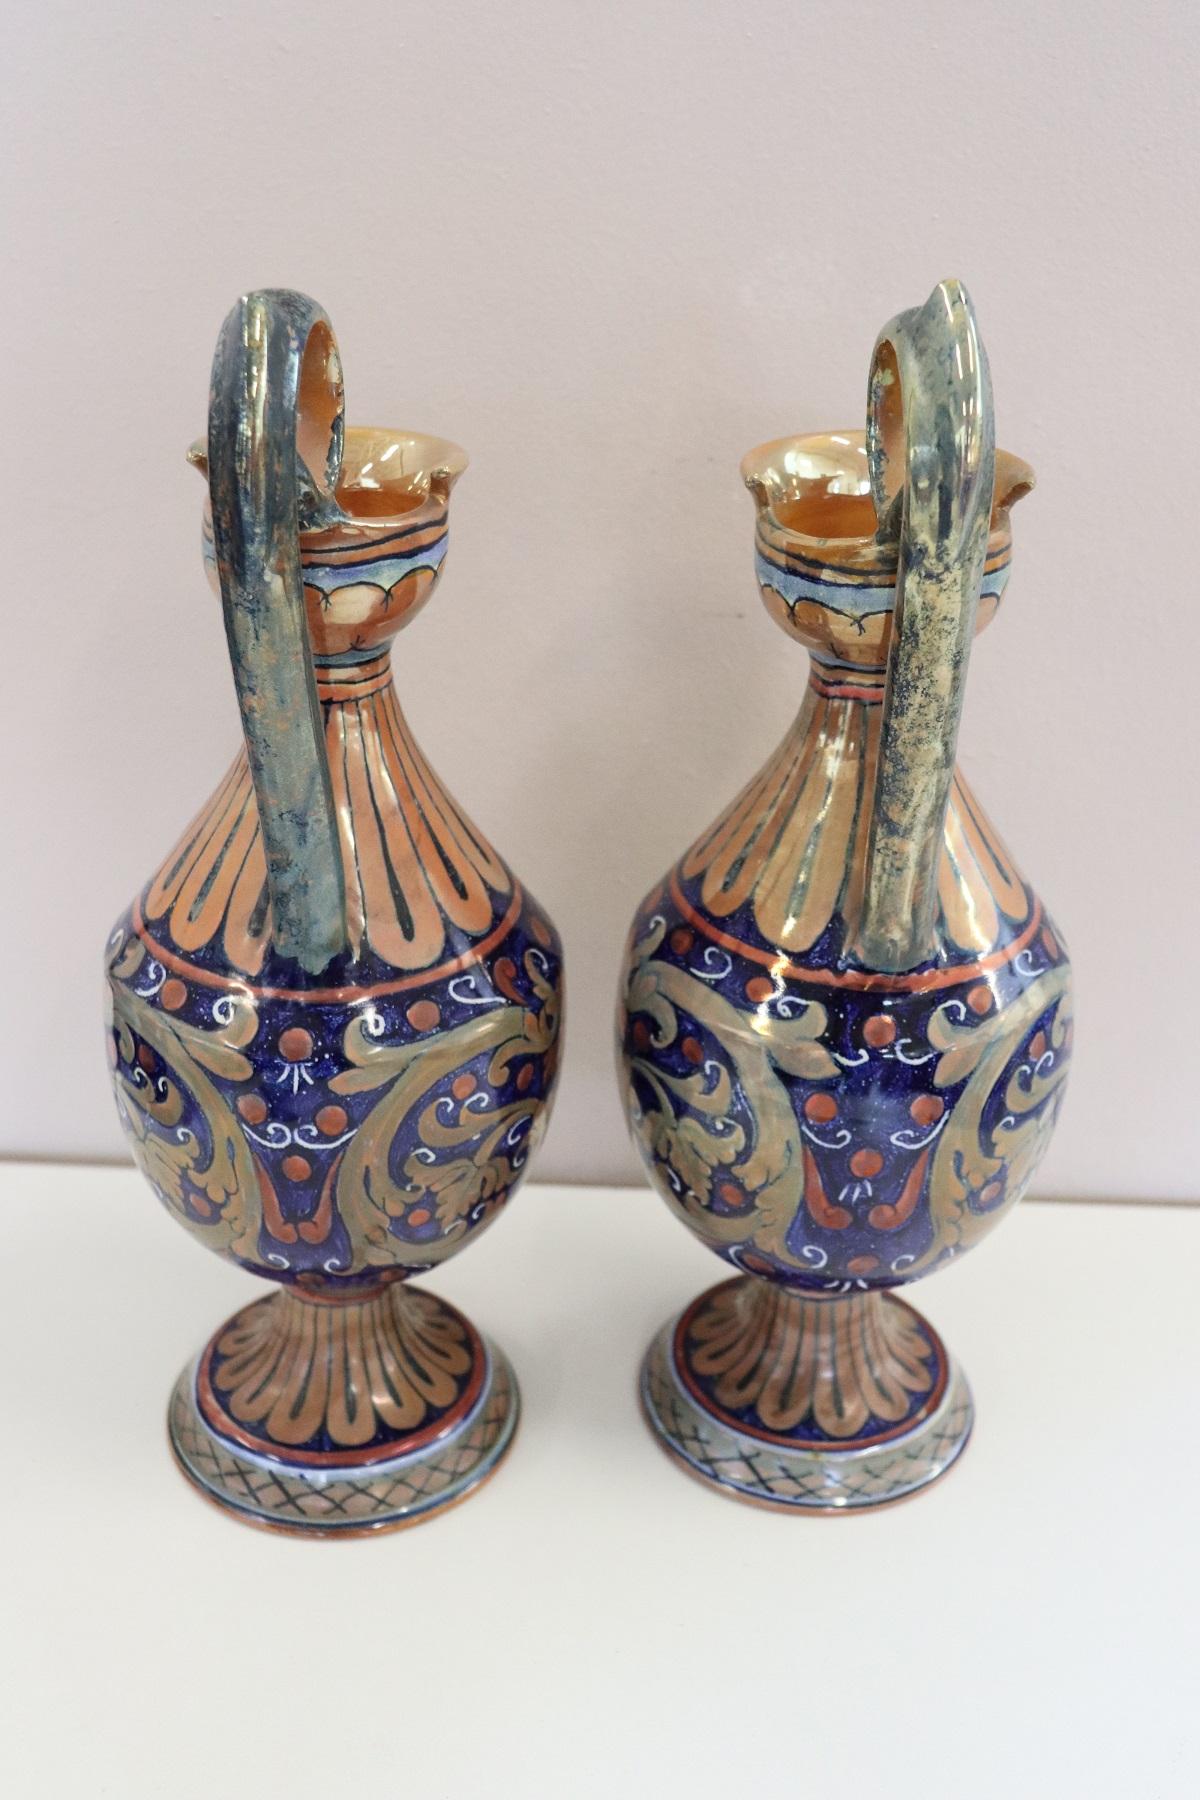 Early 20th Century Pair of Majolica Vases with Blue Decorations by Gualdo Tadino, 1920s